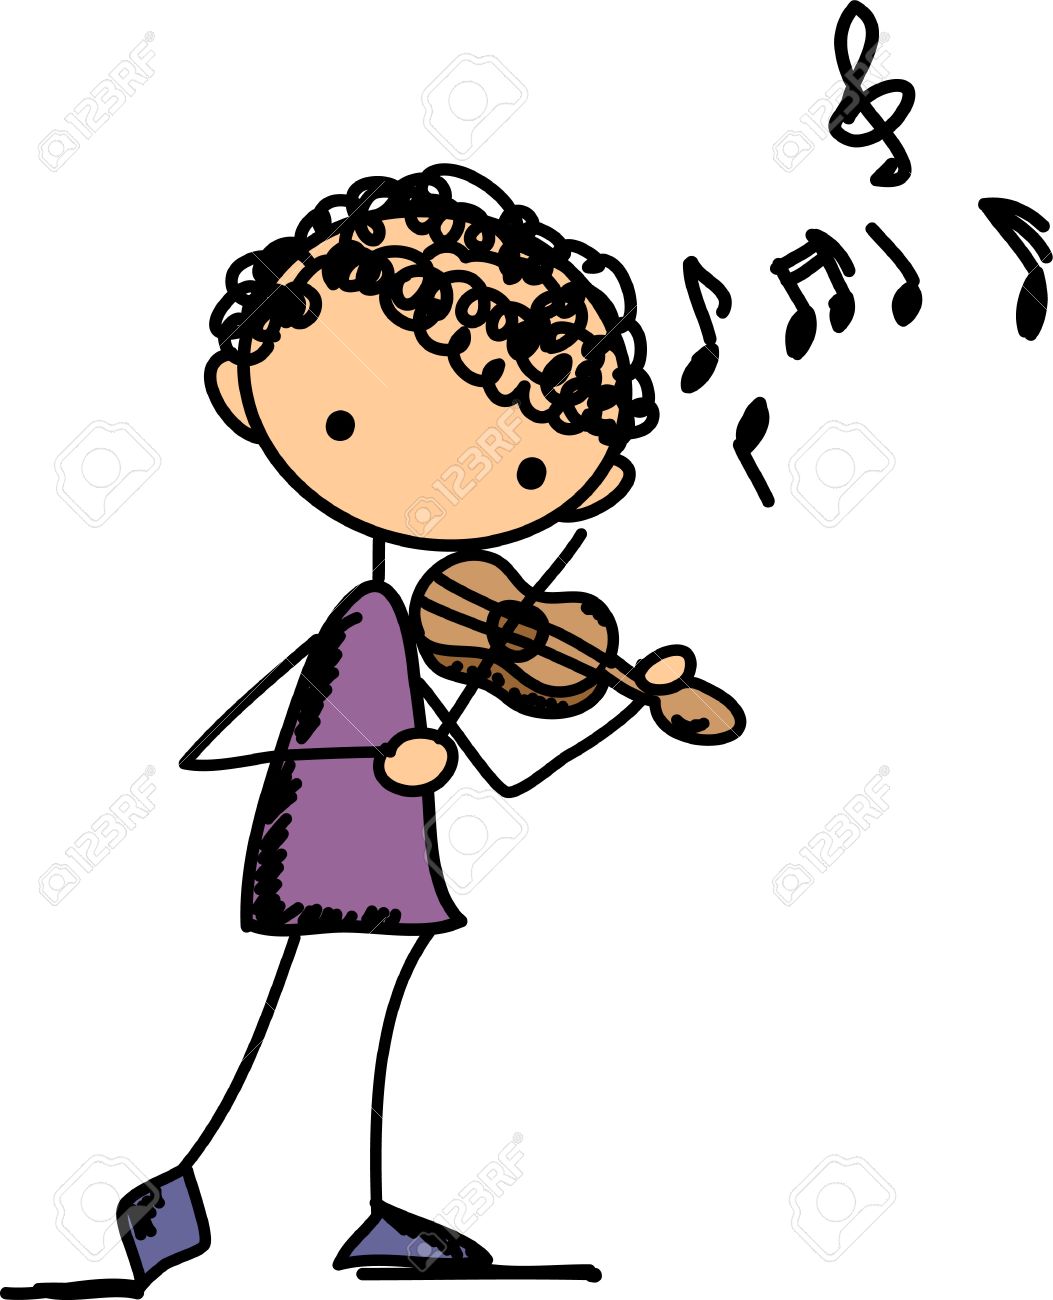 Violinist clipart #5, Download drawings